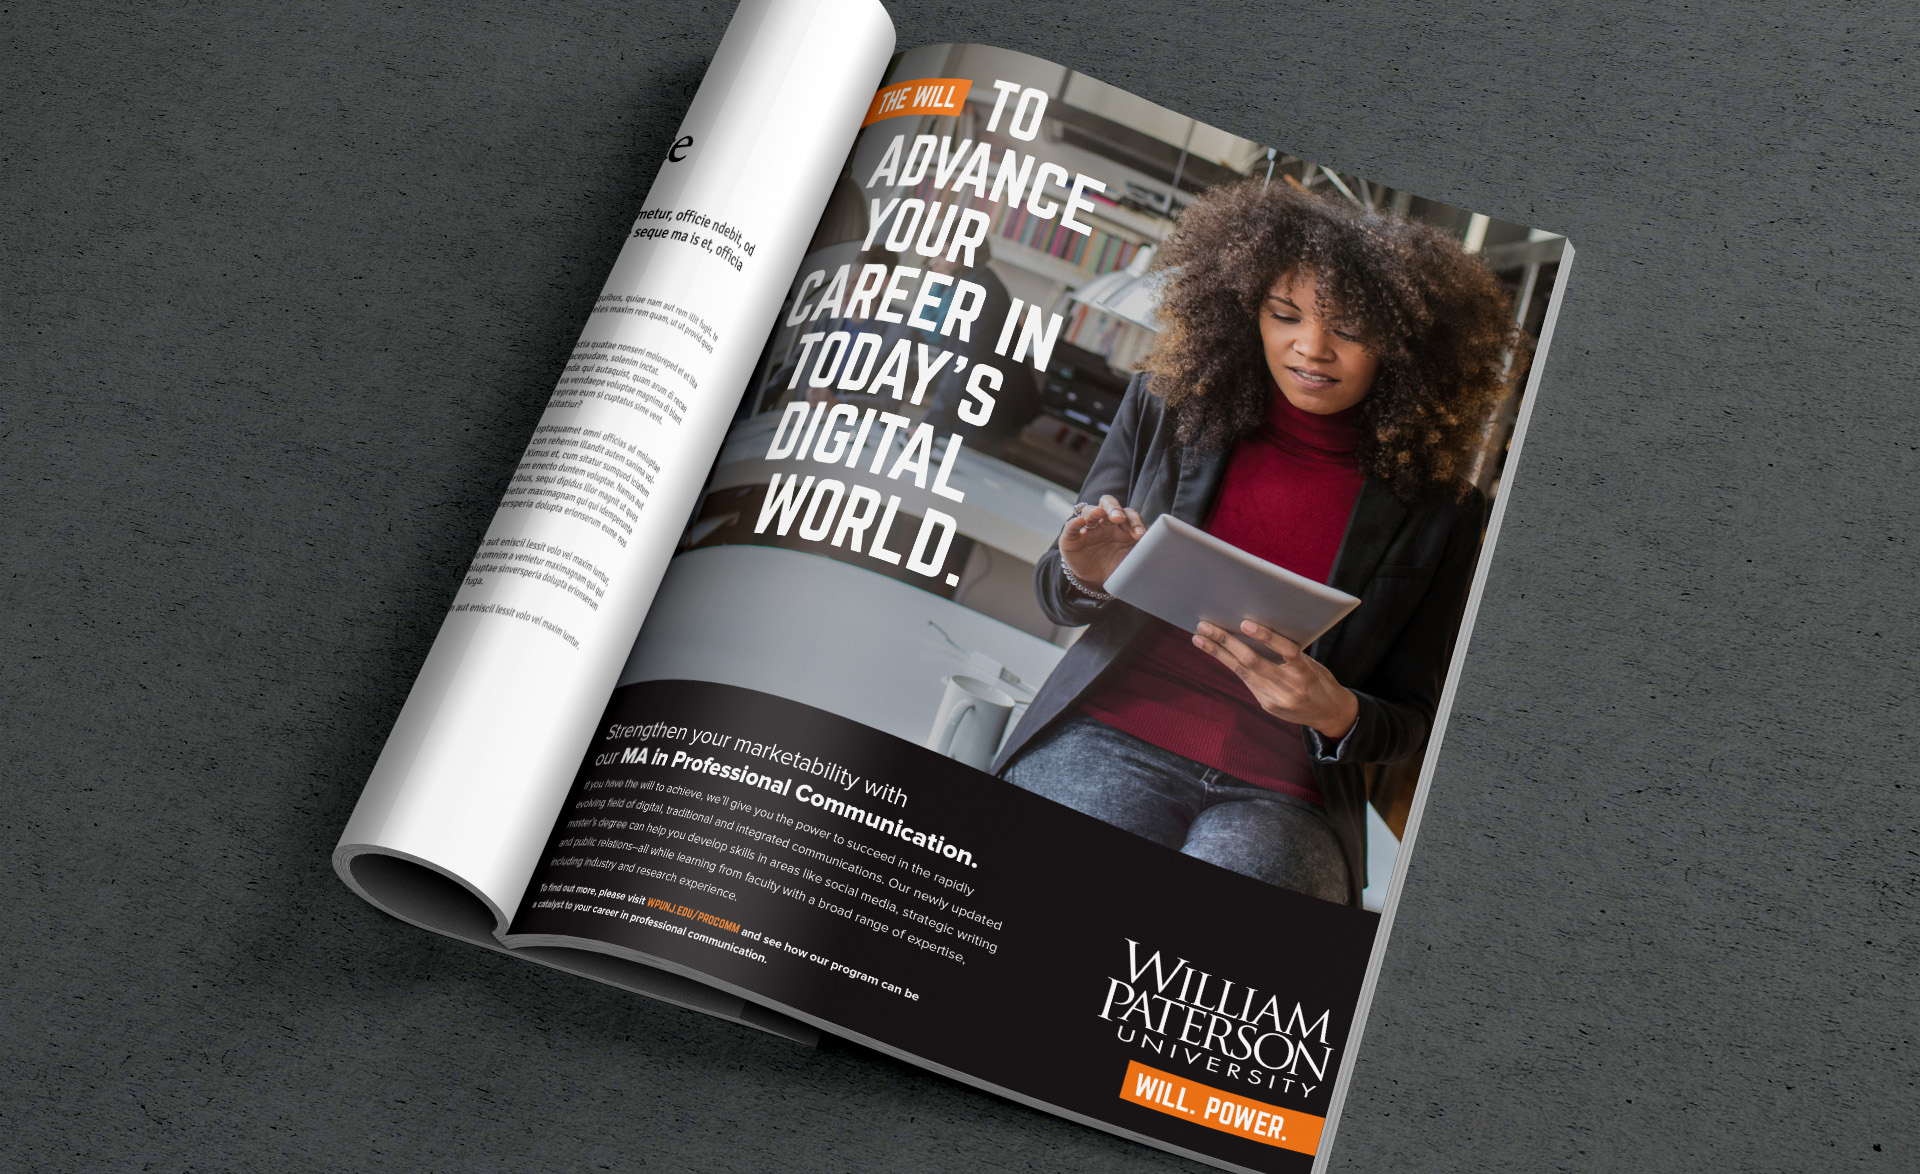 WP print ad: "The Will to advance your career in today's digital world."